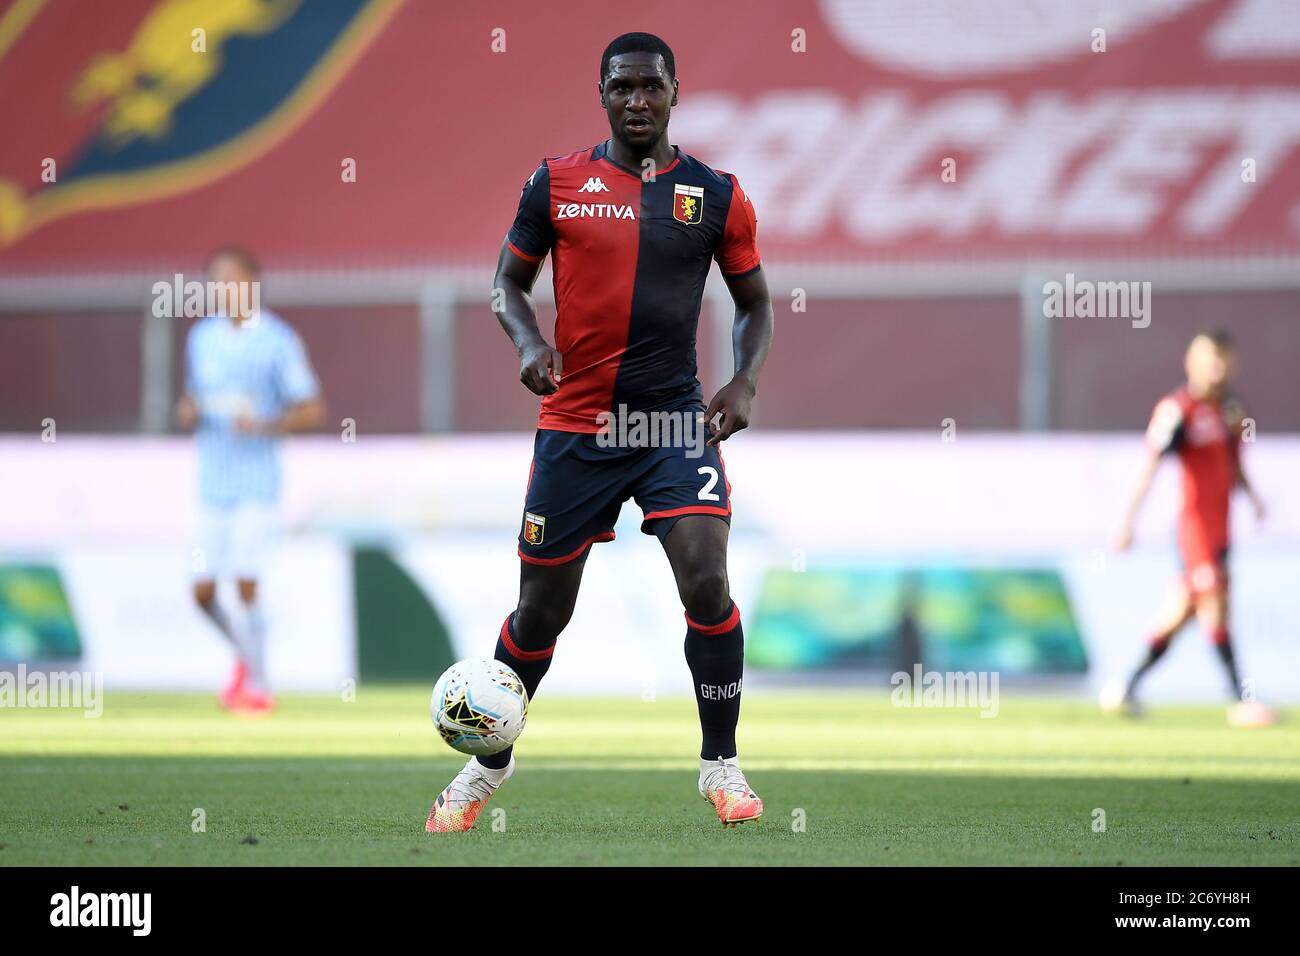 Genoa, Italy. 12th July, 2020. GENOA, ITALY - July 12, 2020: Cristian Zapata of Genoa CFC in action during the Serie A football match between Genoa CFC and SPAL. (Photo by Nicolò Campo/Sipa USA) Credit: Sipa USA/Alamy Live News Stock Photo